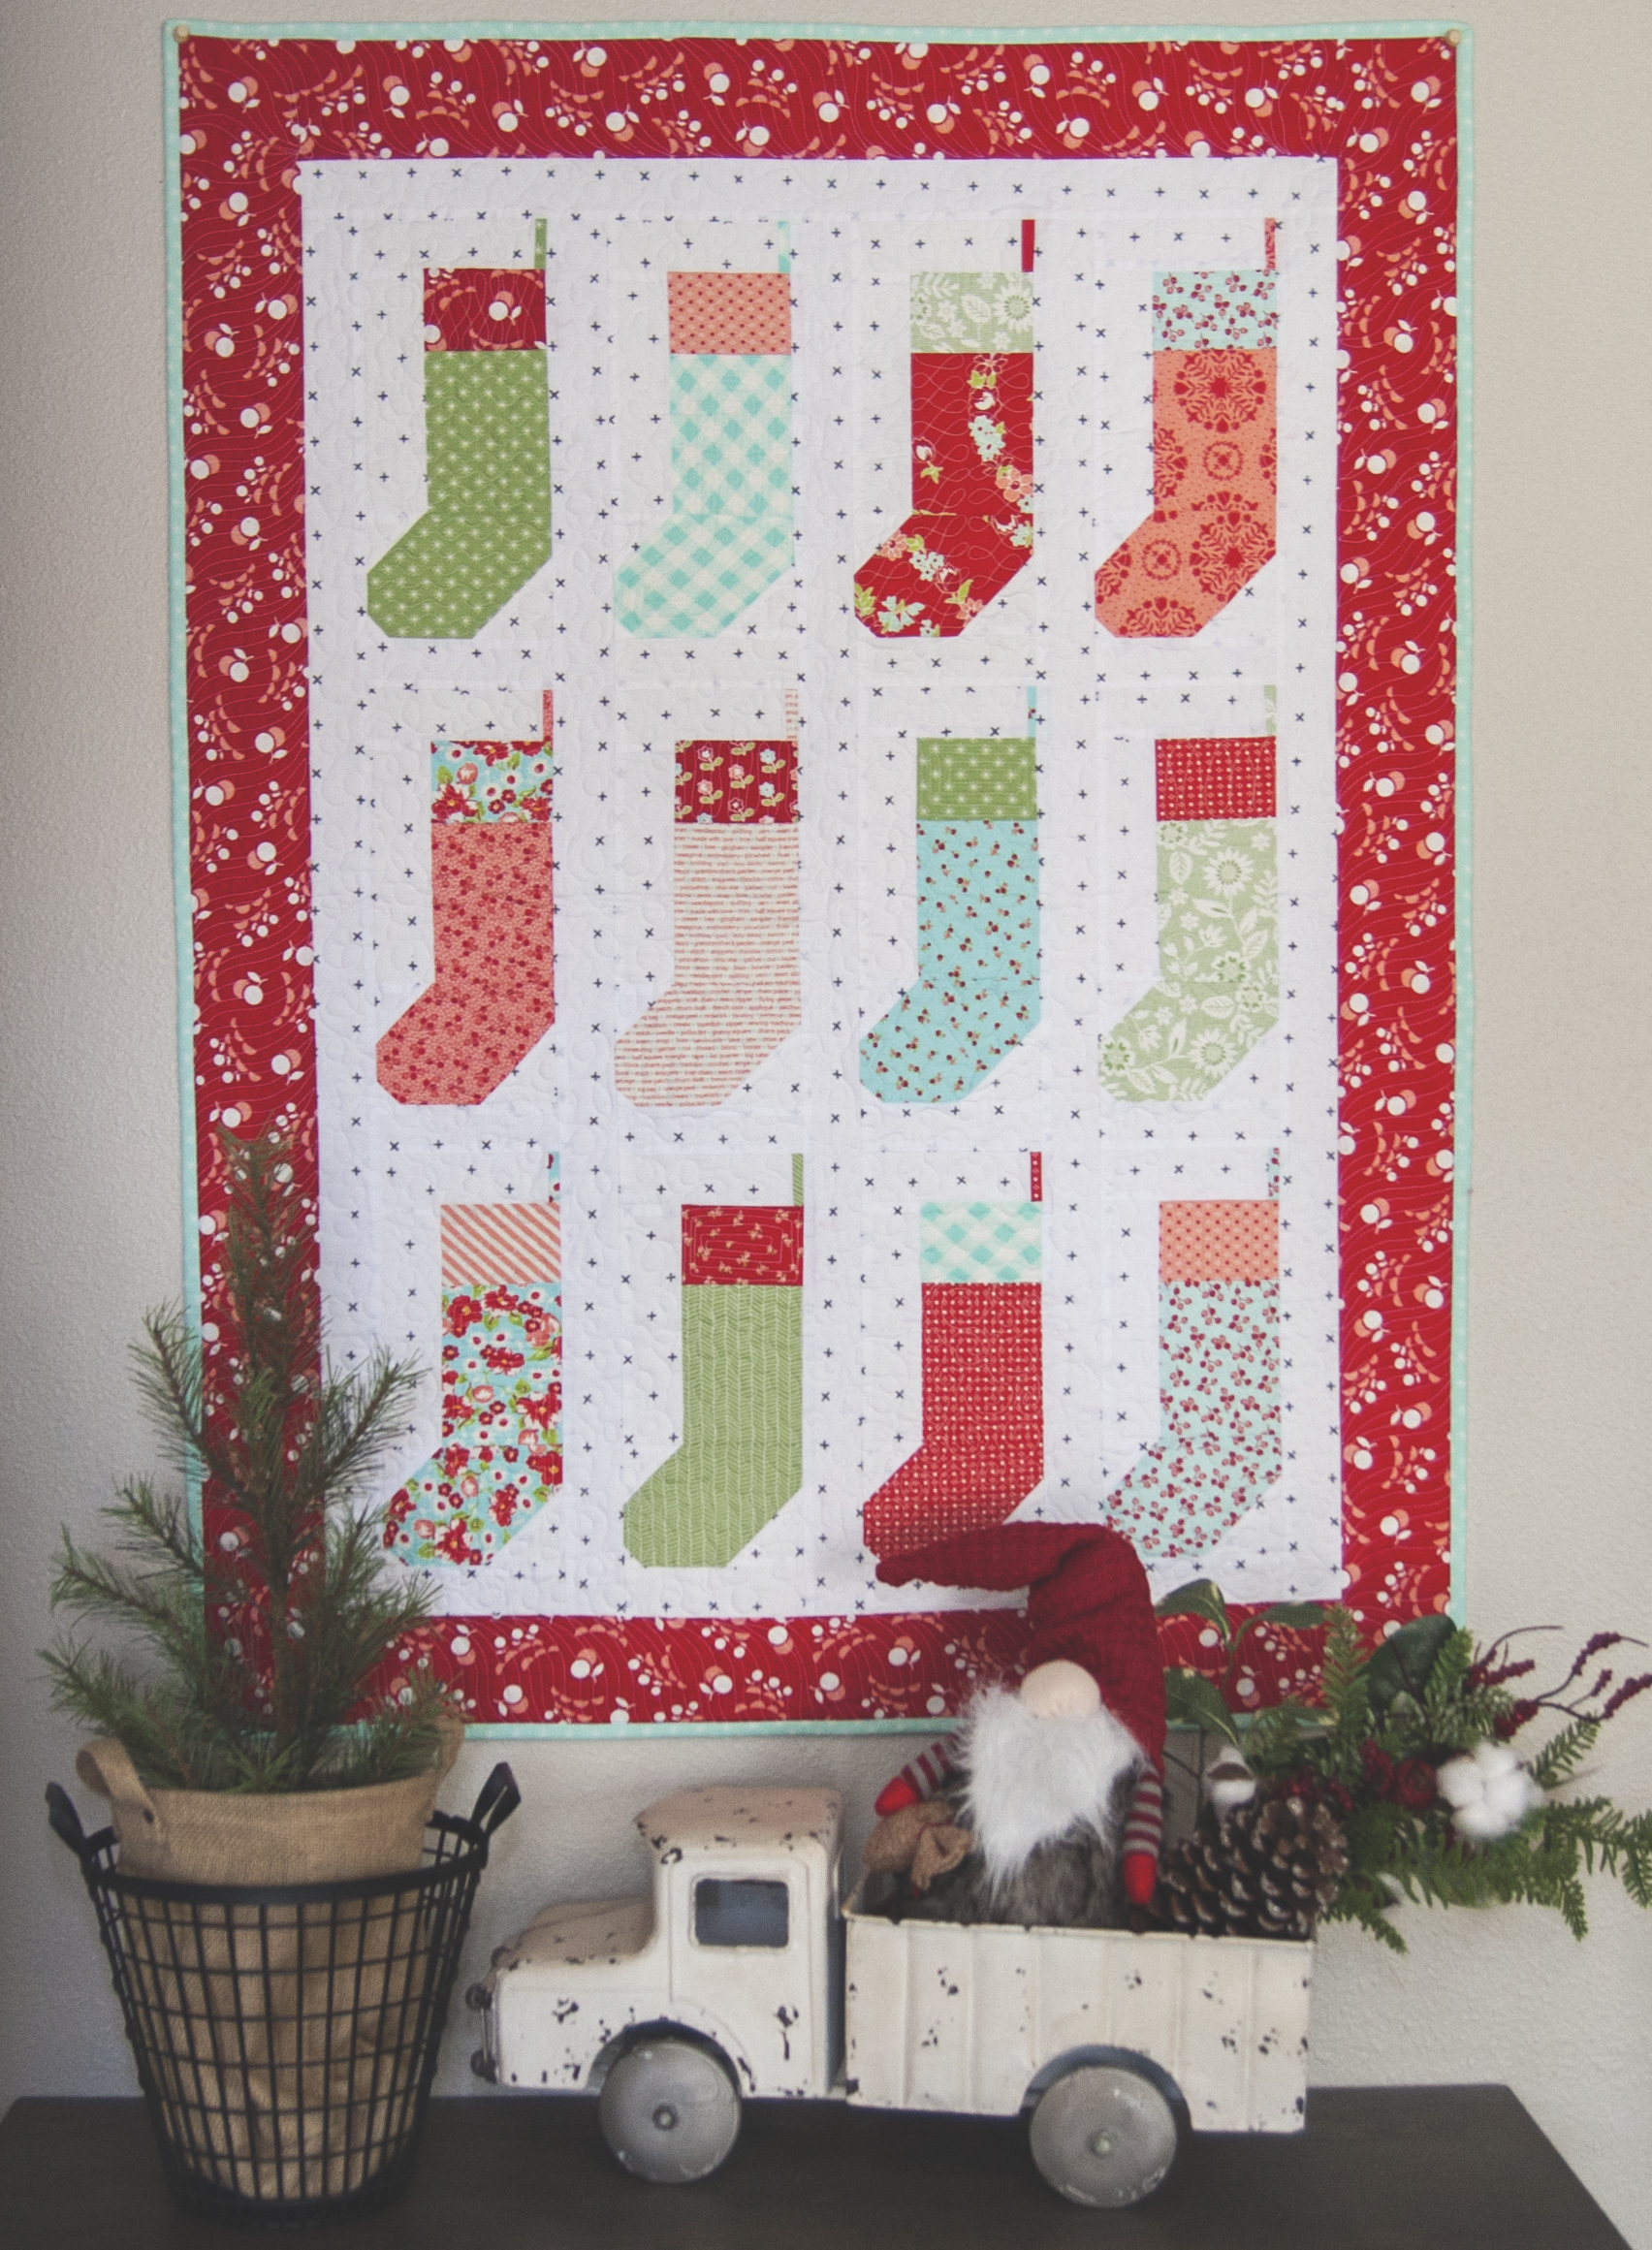 By the Chimney mini by Lella Boutique. Fabric is Bonnie & Camille for Moda Fabrics.